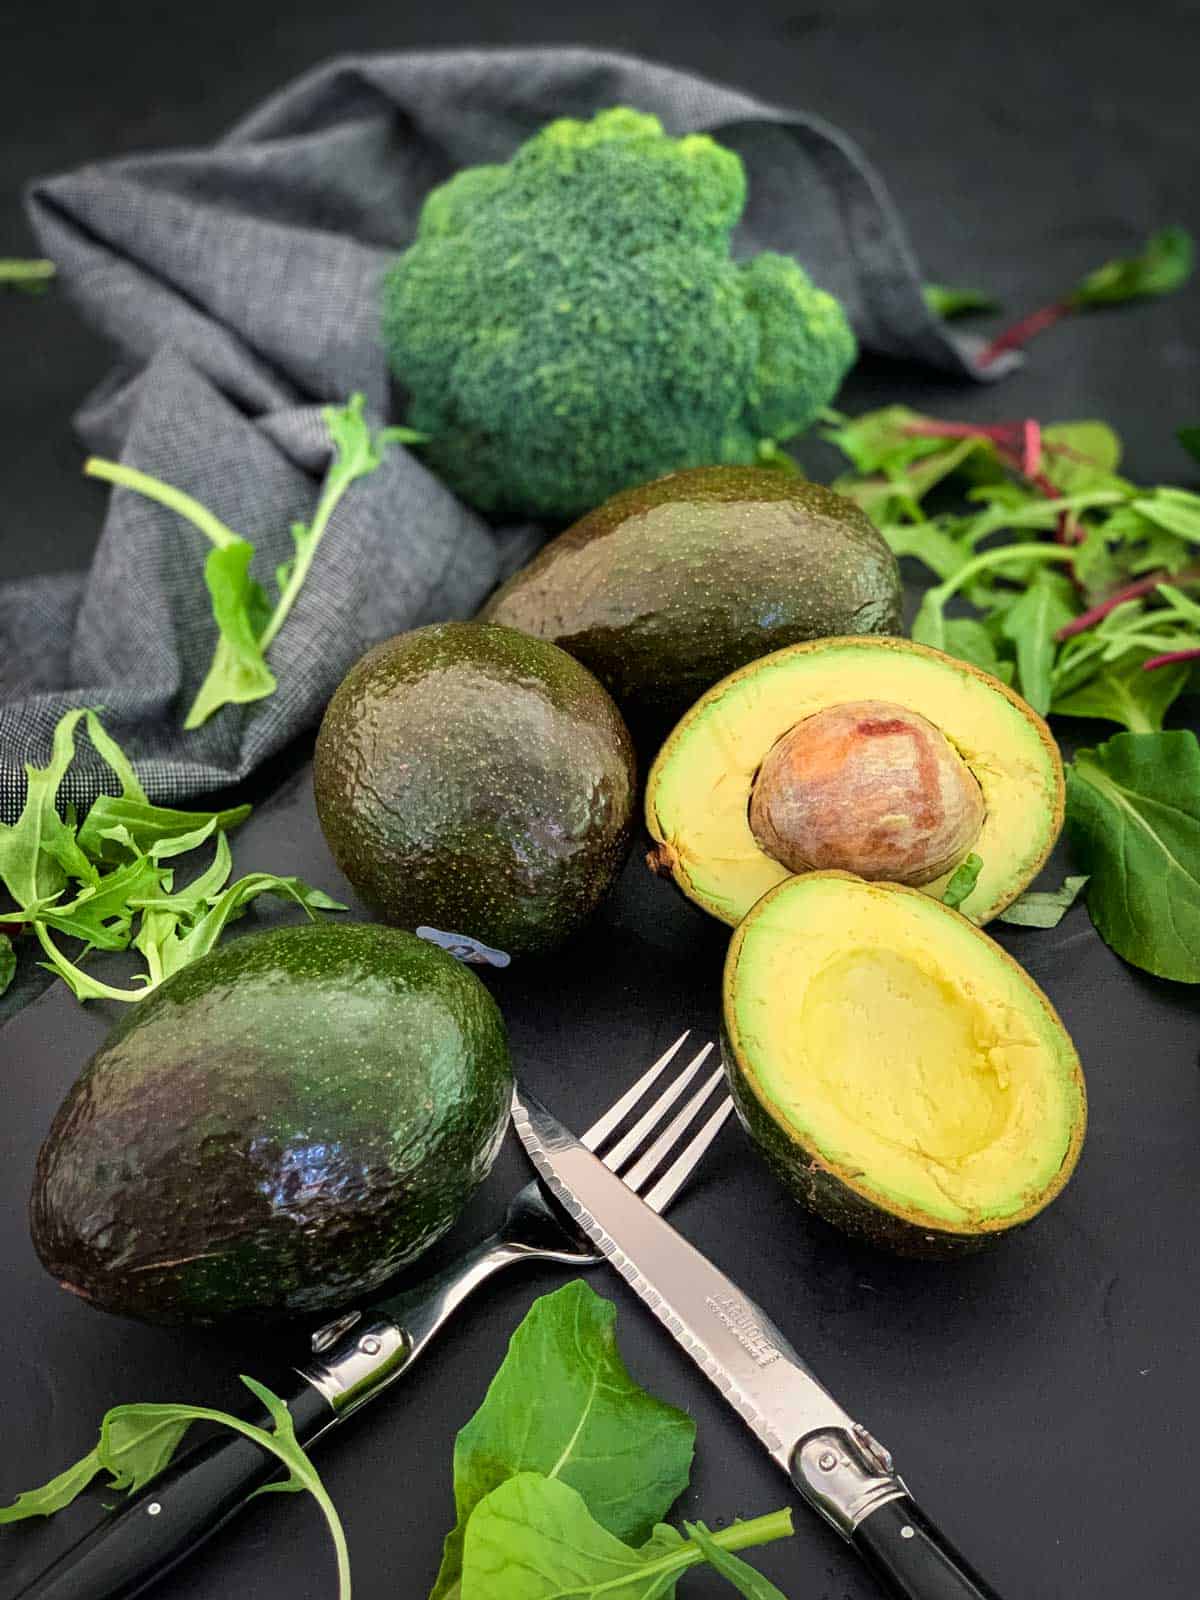 Avocados whole and half against a backdrop of a blue napkin, broccoli and mixed leaves